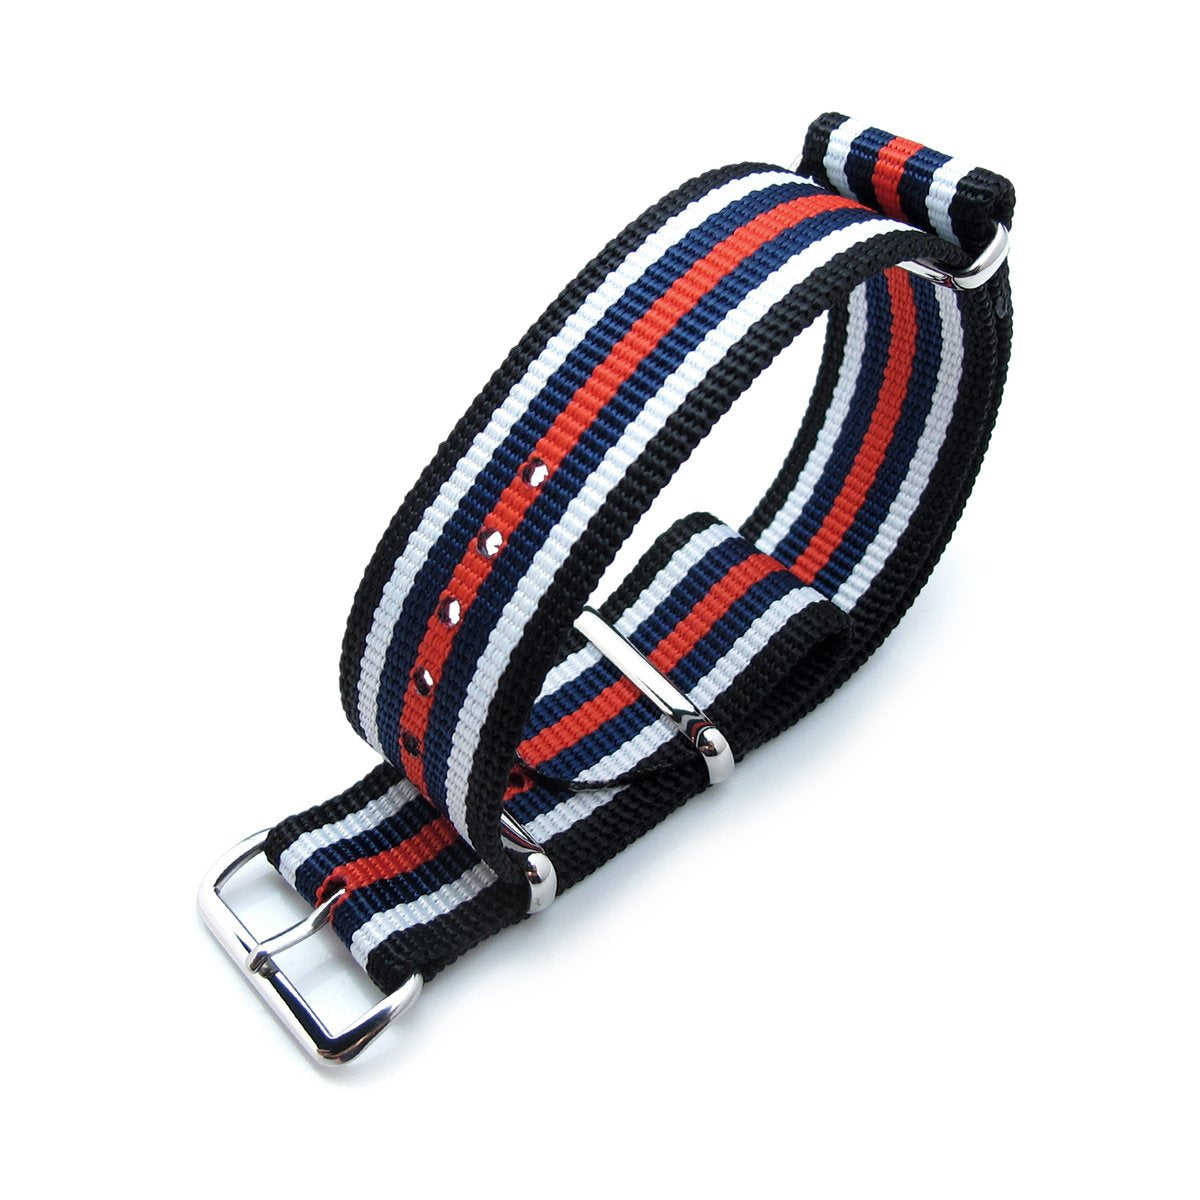 MiLTAT 21mm or 22mm G10 NATO Bullet Tail Watch Strap Ballistic Nylon Polished Black White Blue &amp; Red Stripes Strapcode Watch Bands